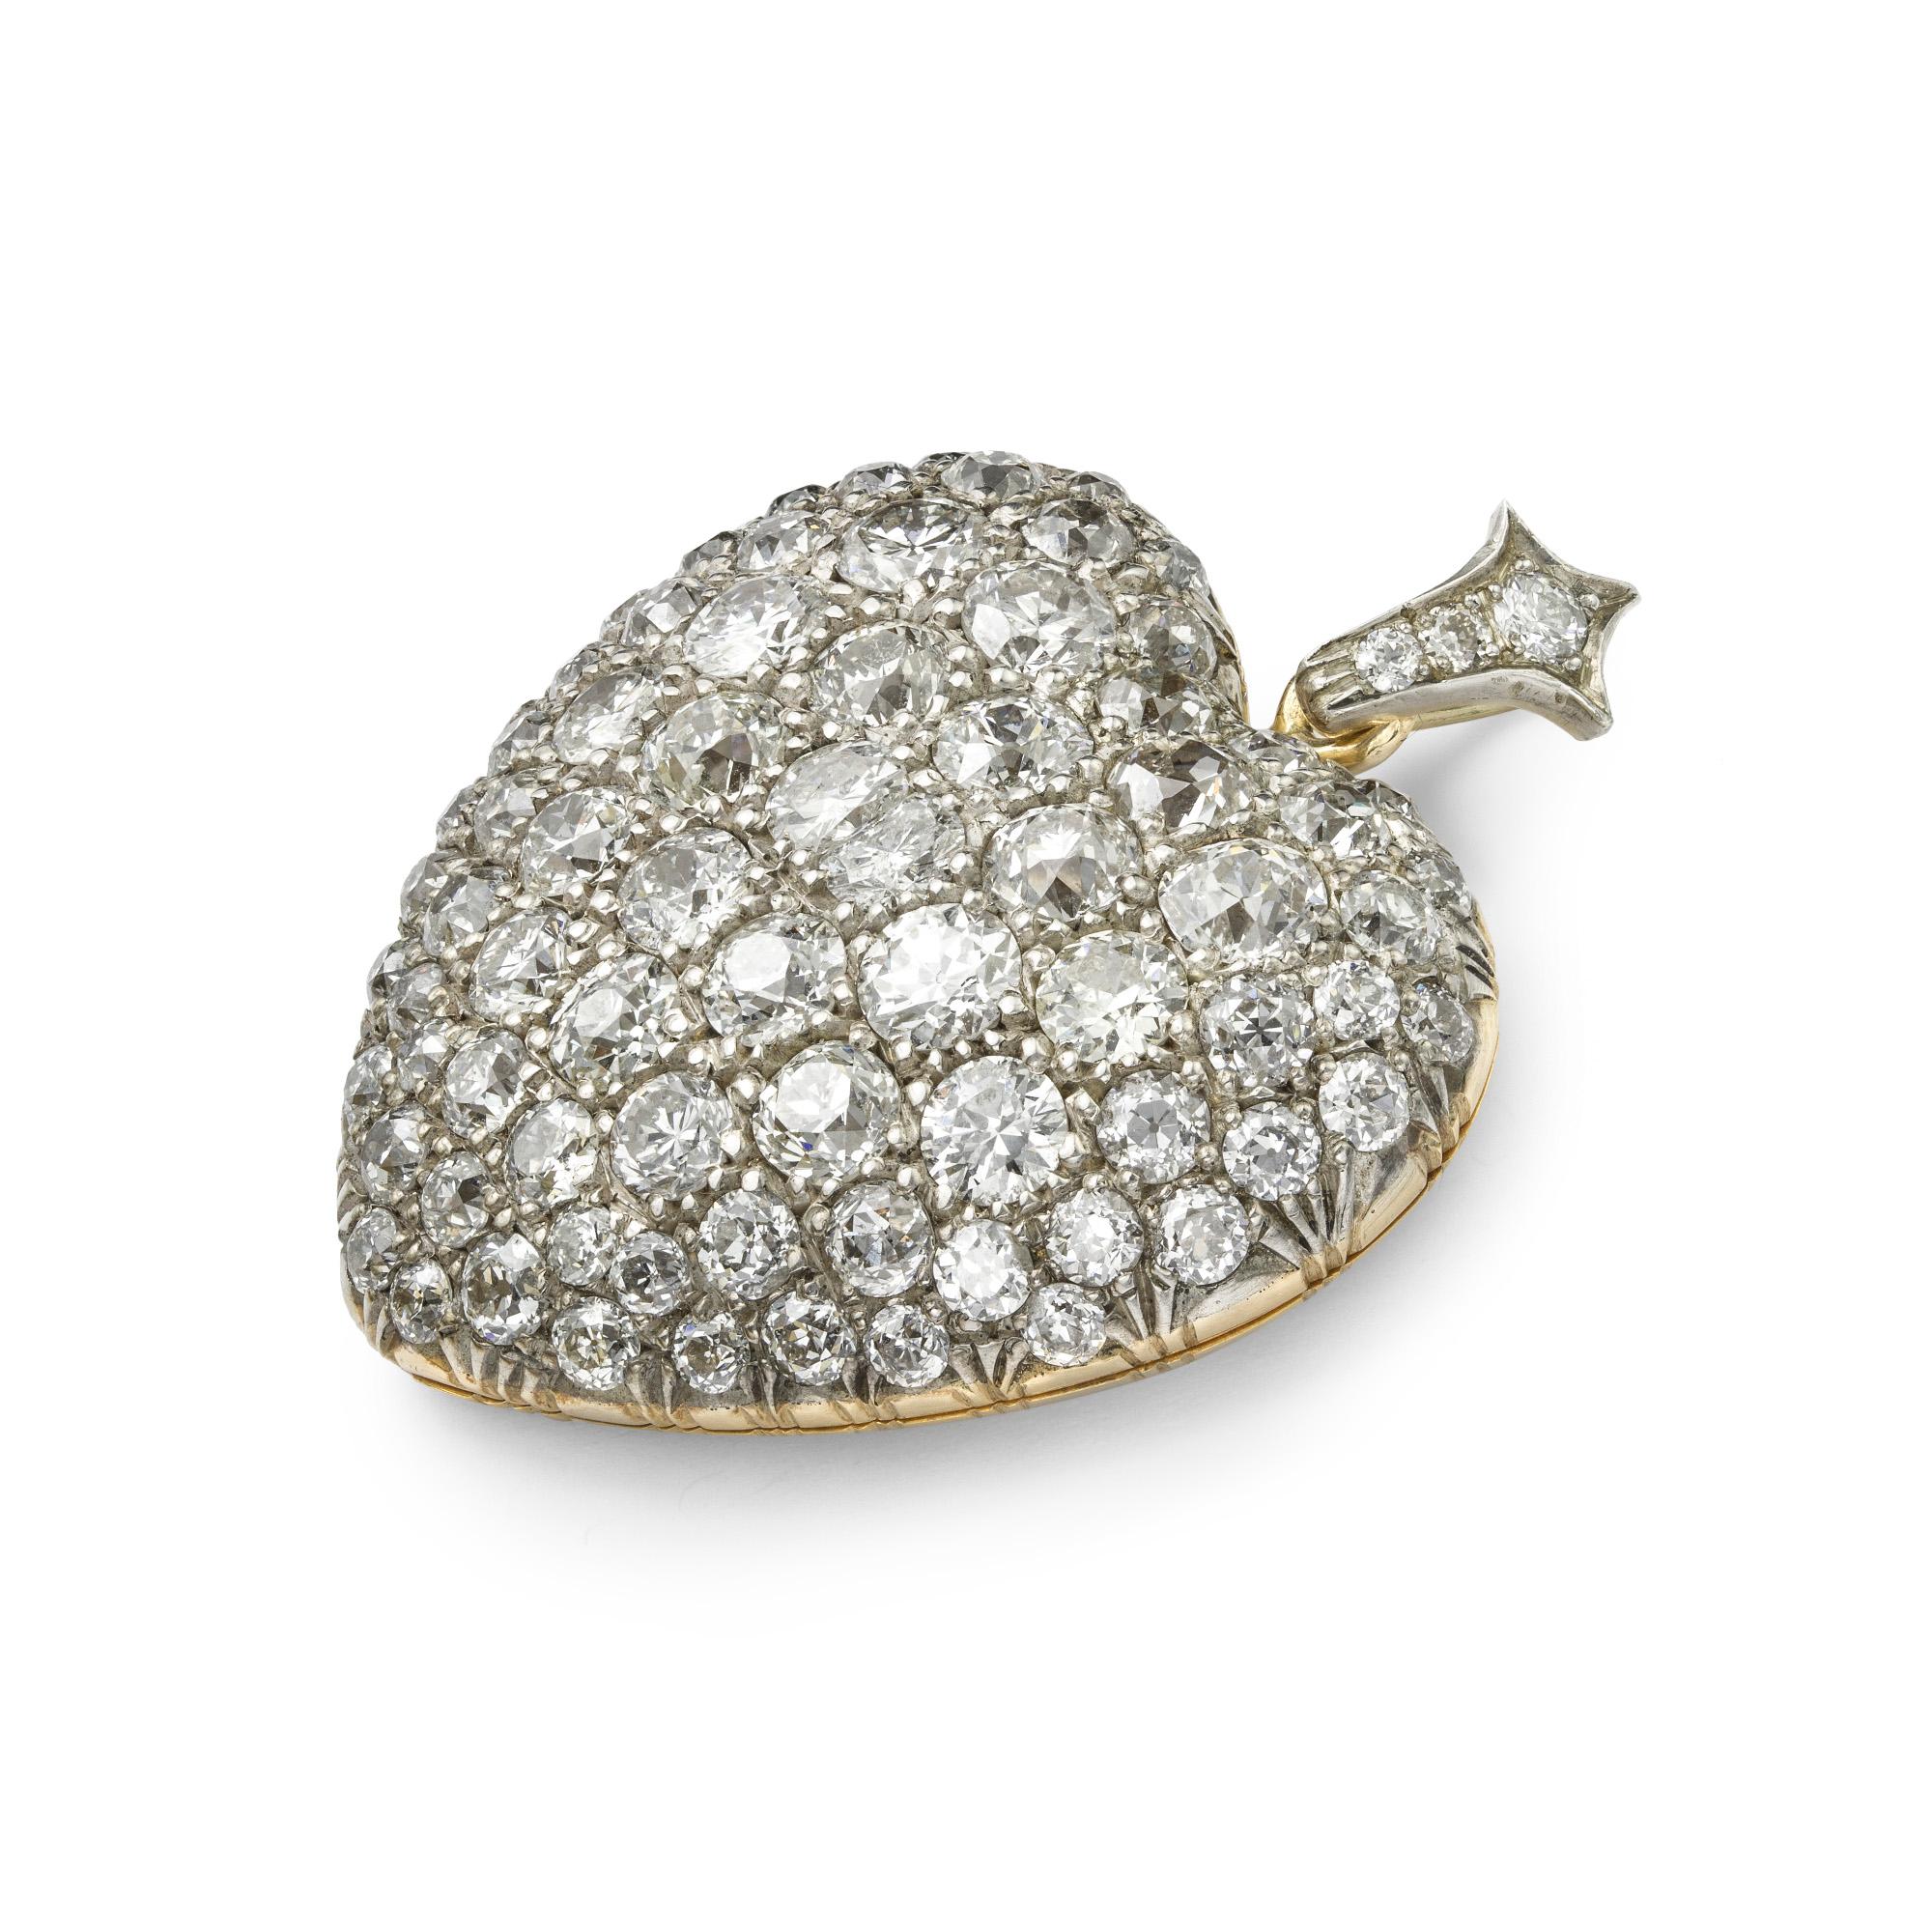 A Victorian diamond-set heart pendant, the pendant set throughout with old brilliant-cut diamonds graduating from the centre and estimated to weigh a total of 11 carats, grain set in silver to a gold mount with glass locket compartment to the